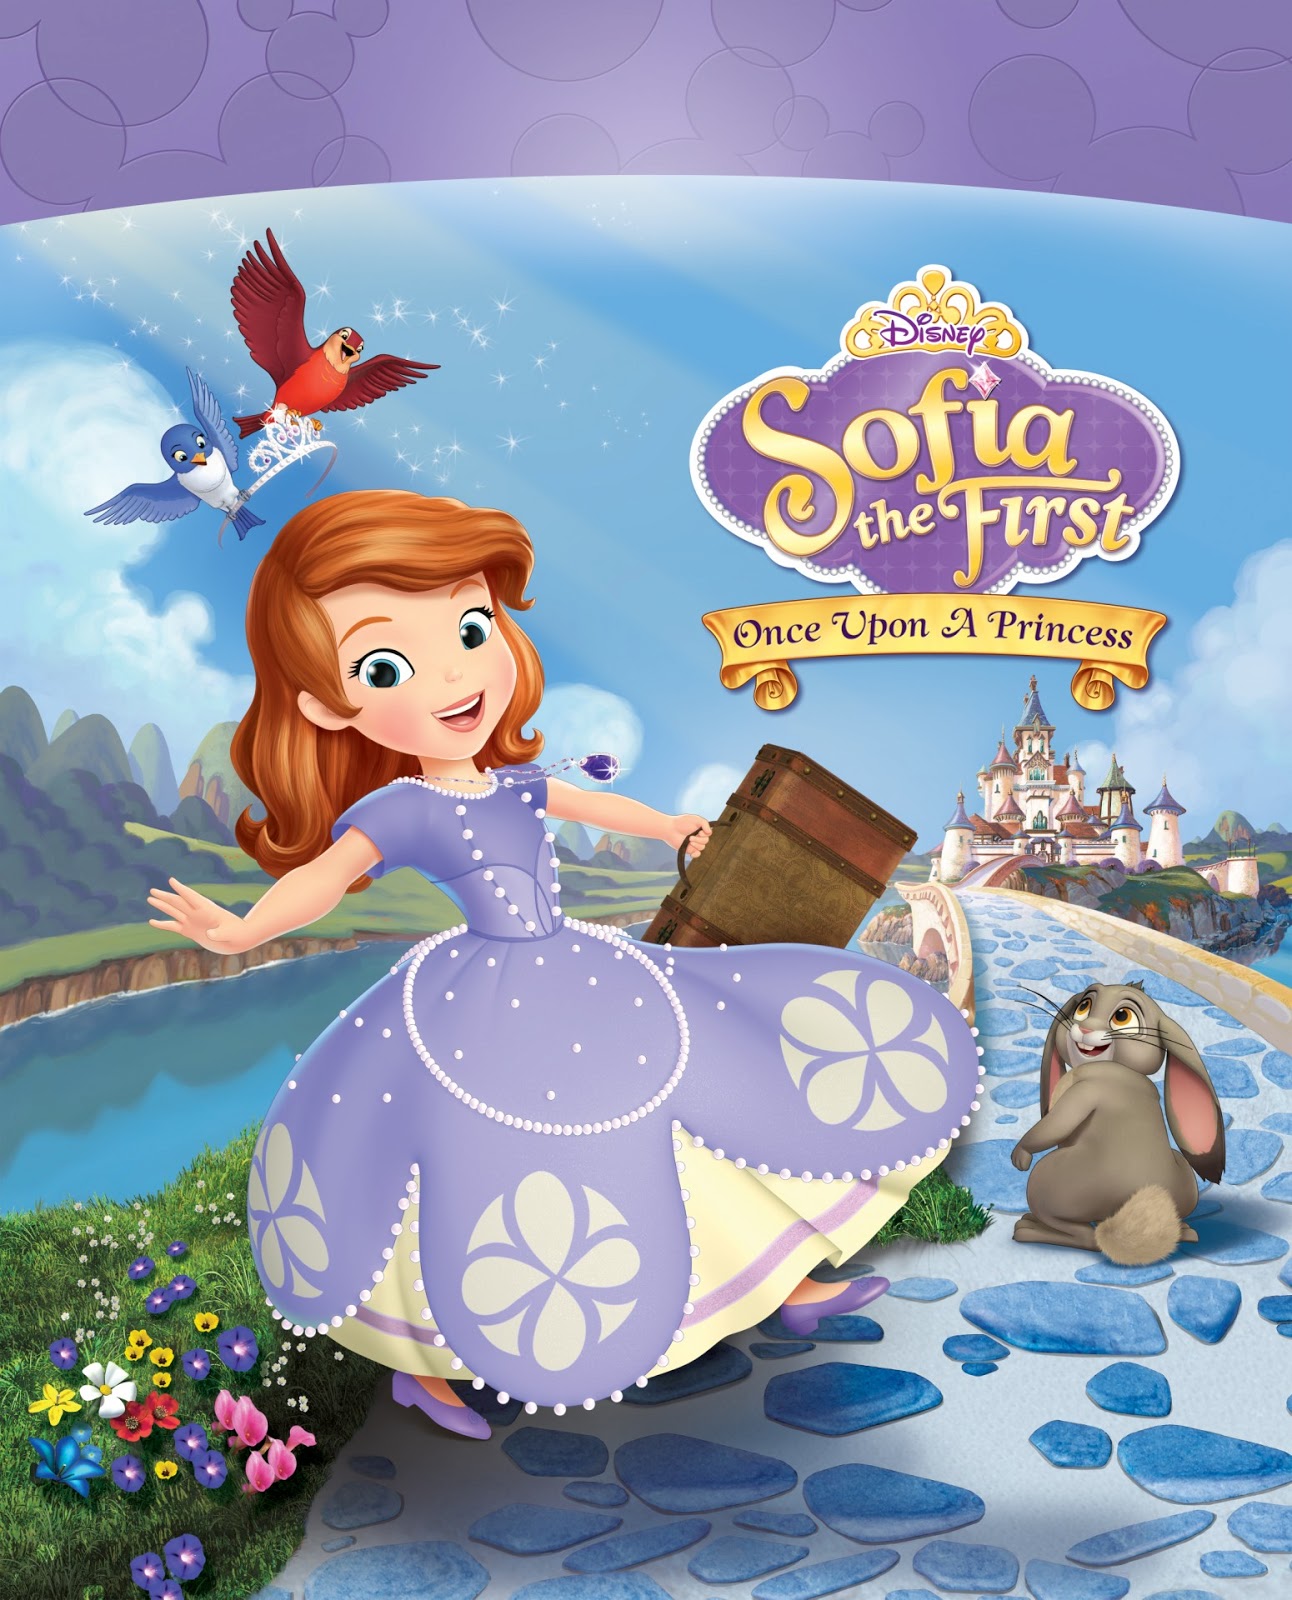 Occasions of JOY: Disney's First Little Princess - Sofia The First